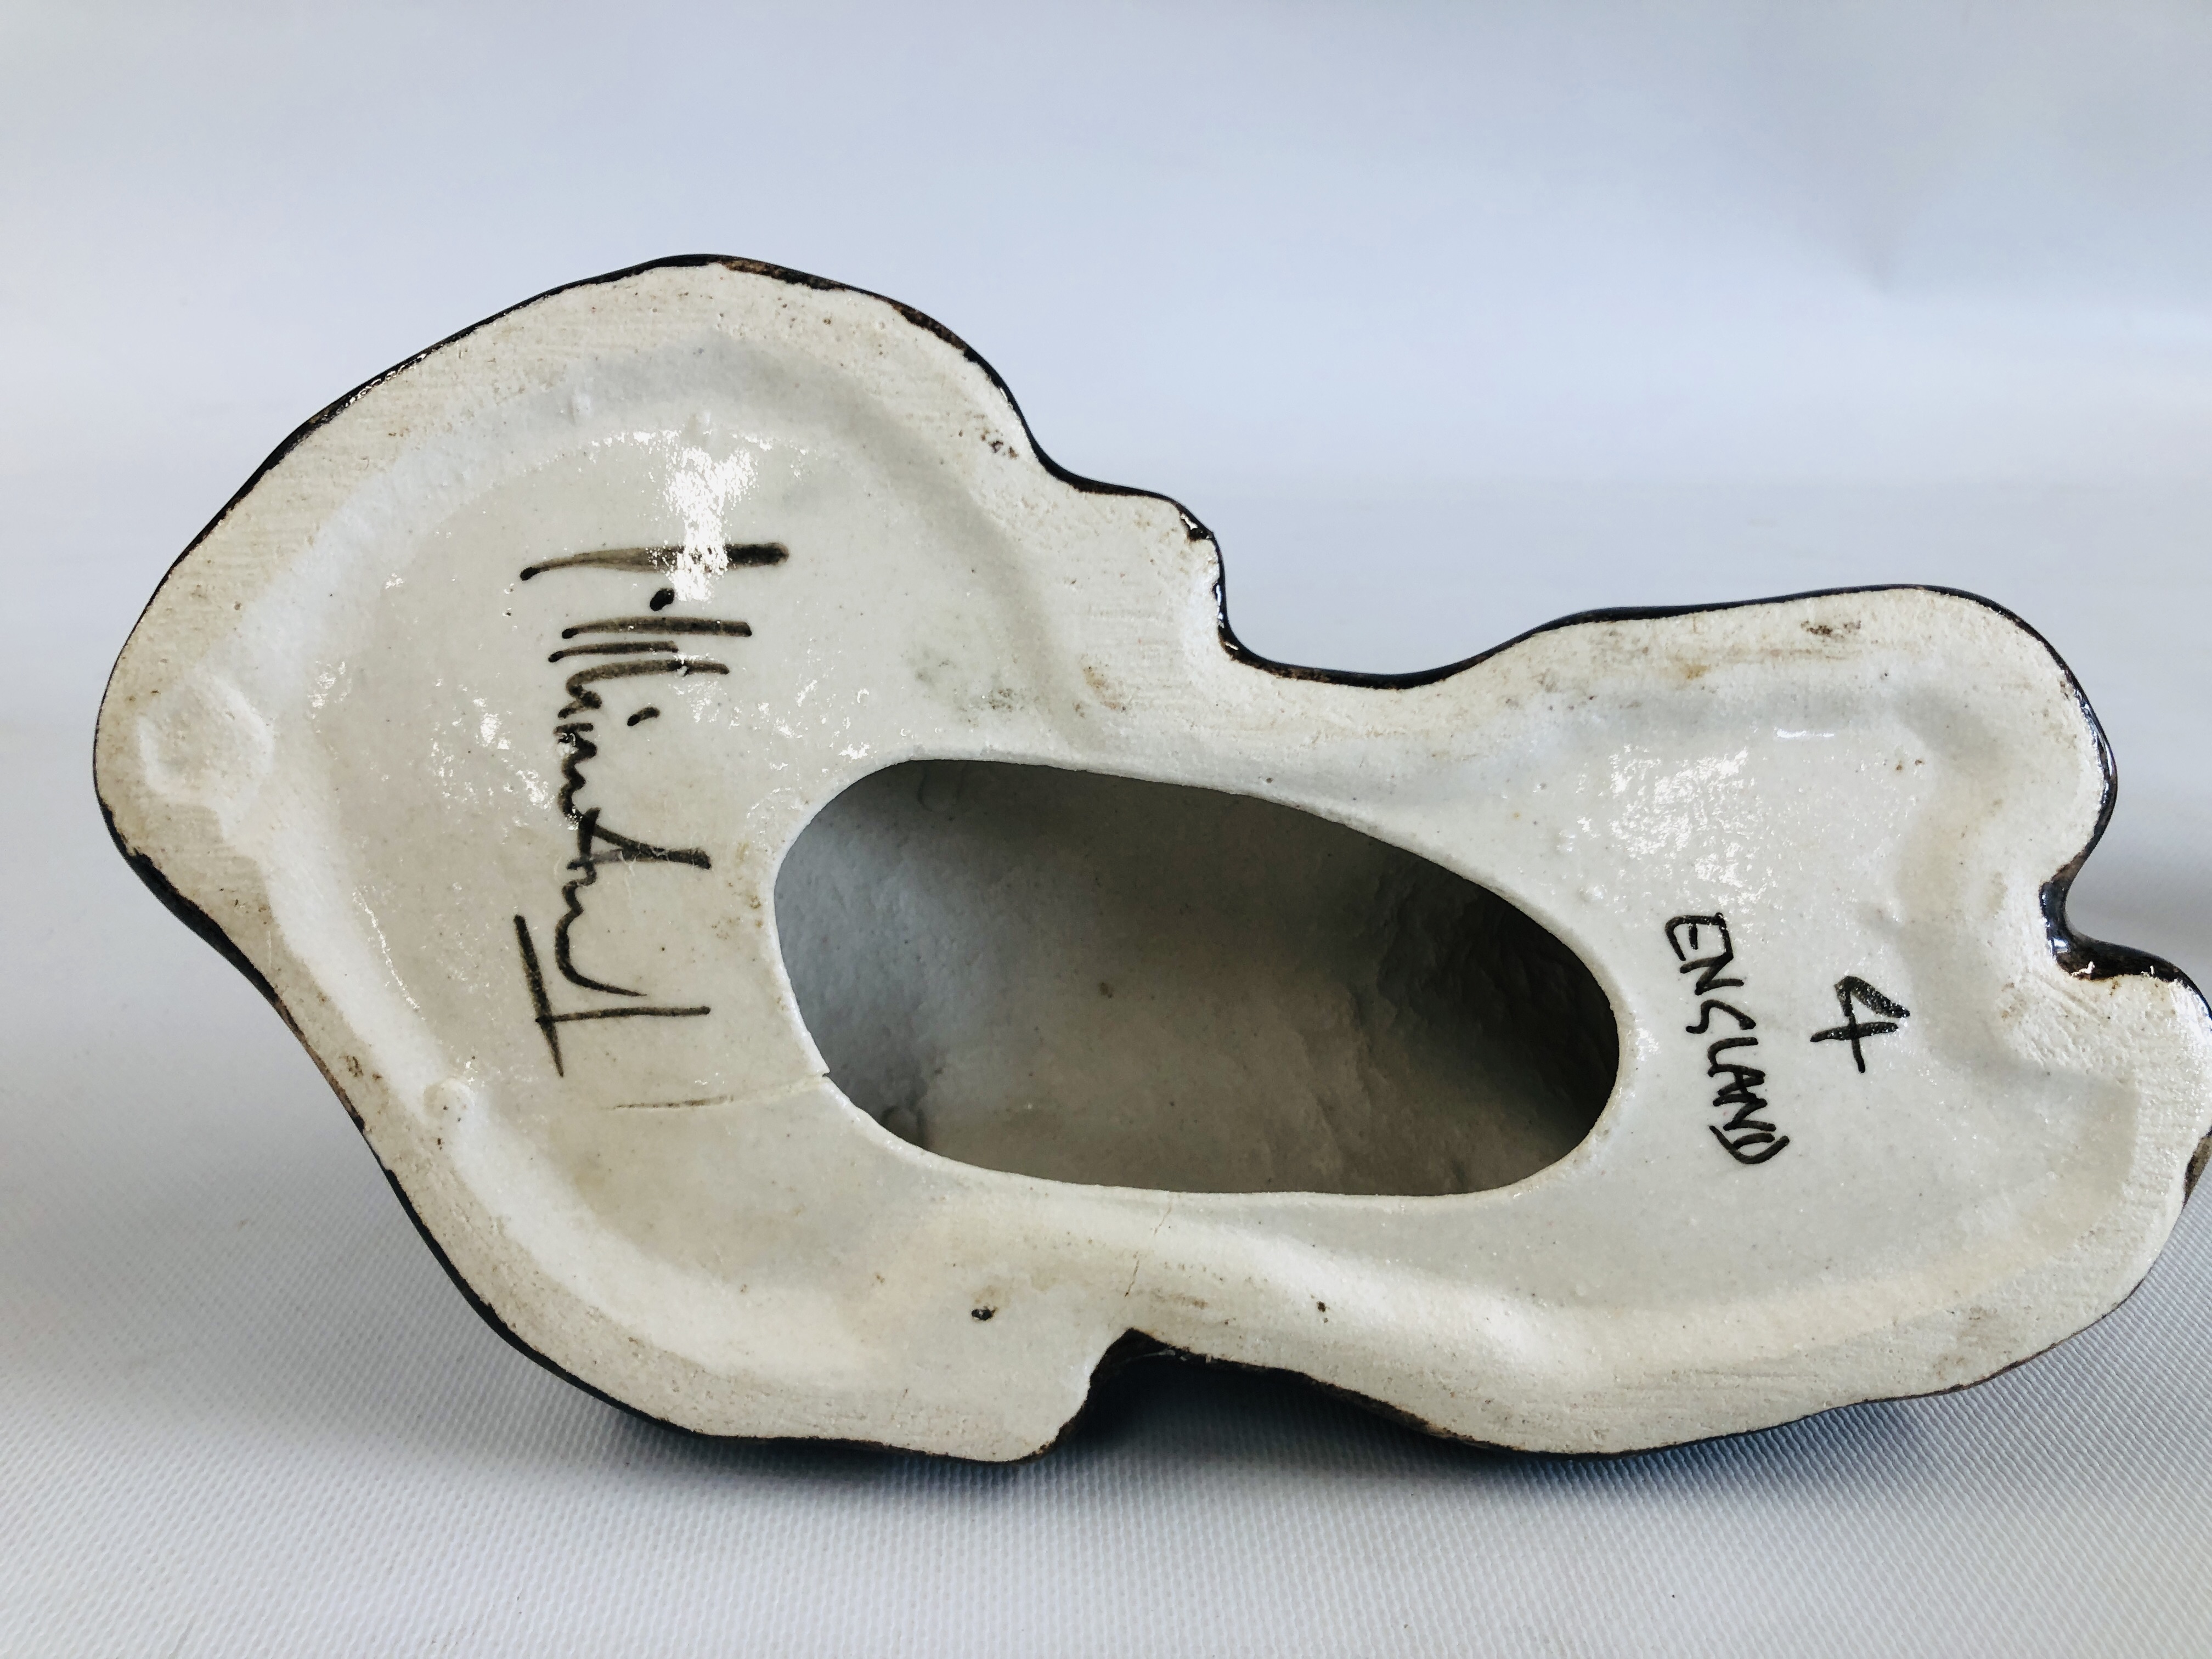 A WINSTANLEY POTTERY EXAMPLE OF A "SEATED" CAT BEARING SIGNATURE TO THE BASE, H 23. - Image 10 of 16